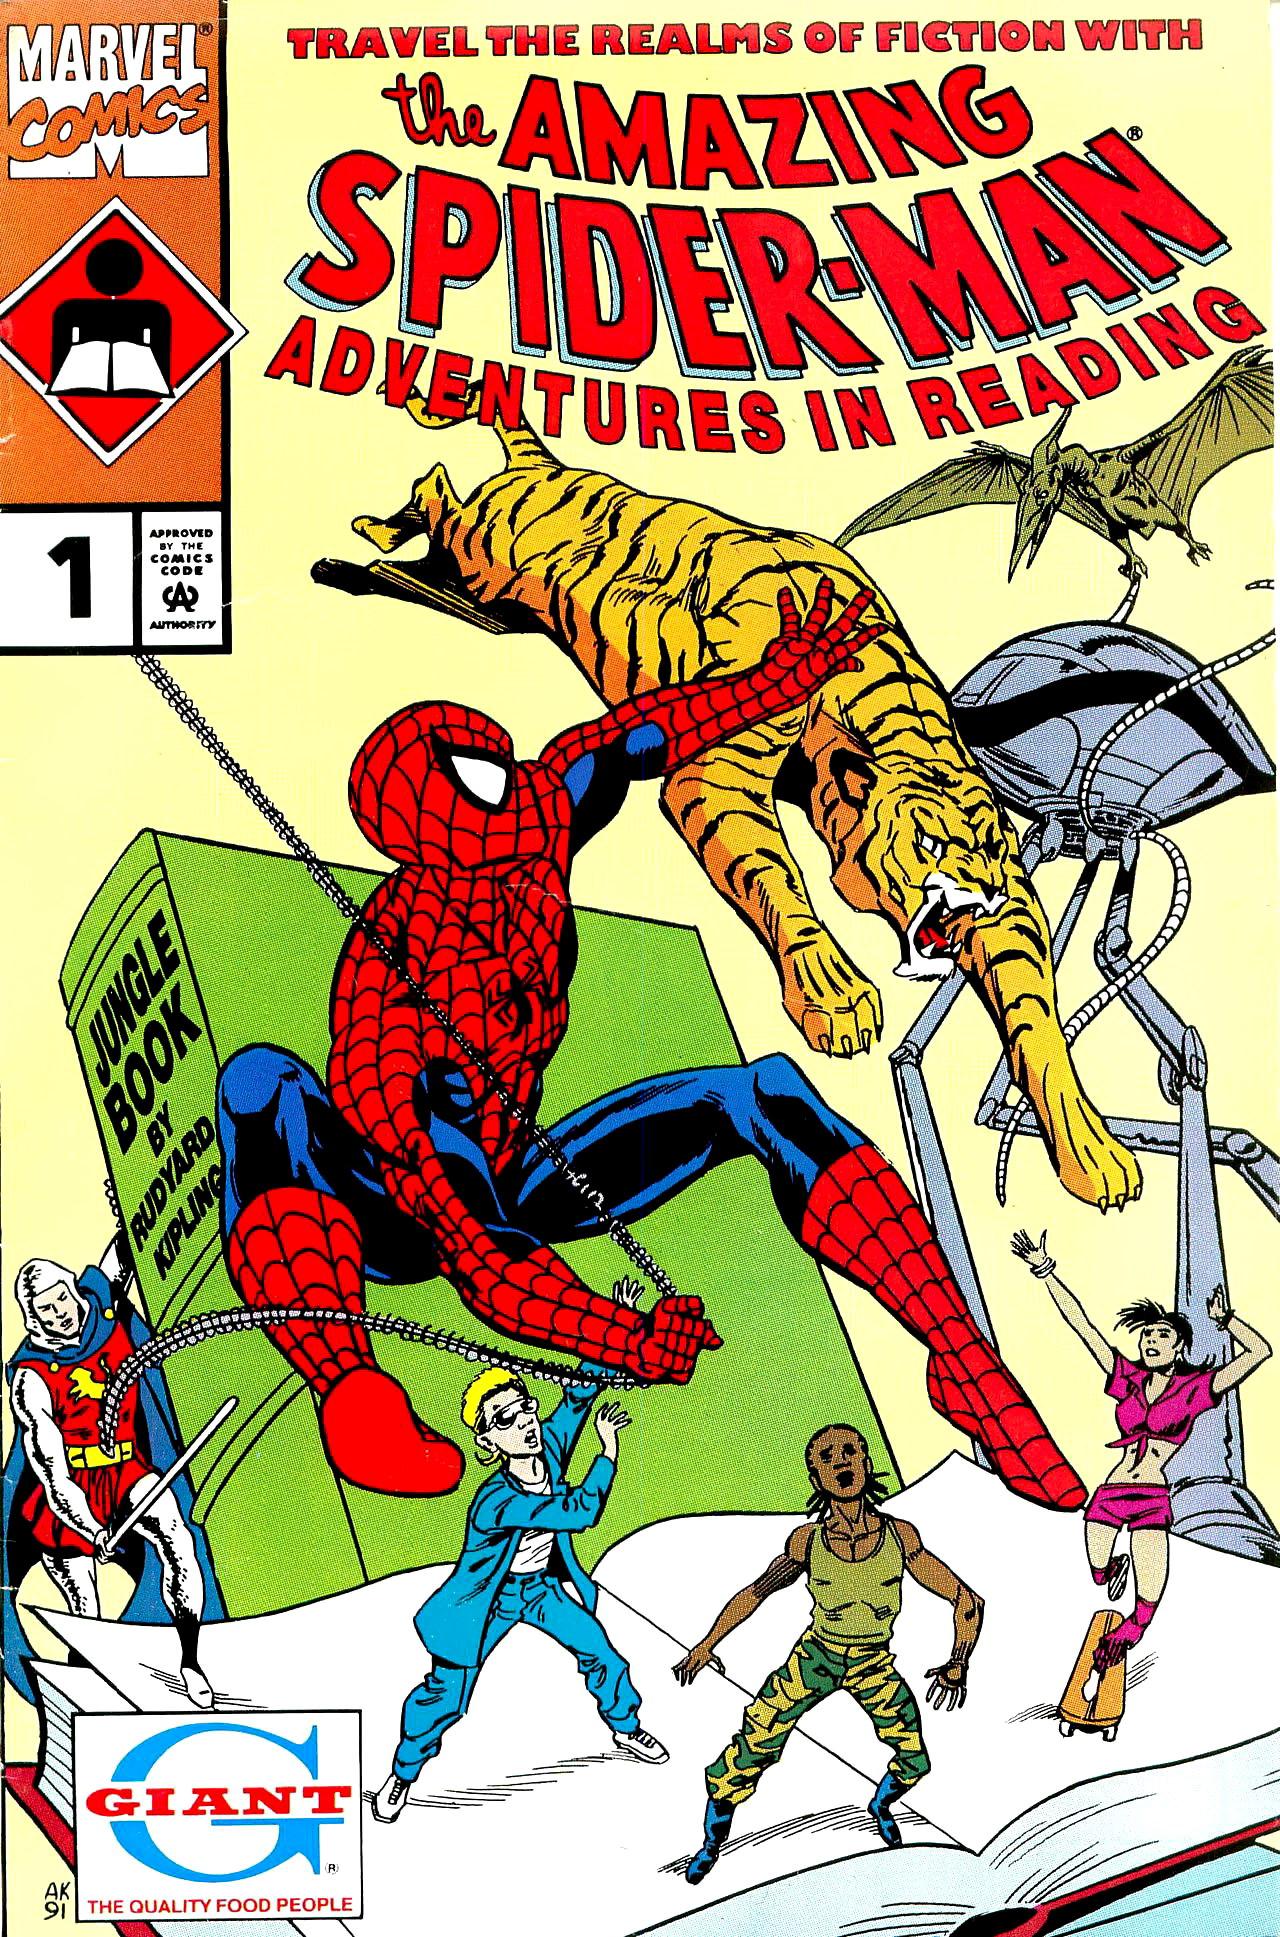 Adventures in Reading Starring the Amazing Spider-Man Vol. 2 #1